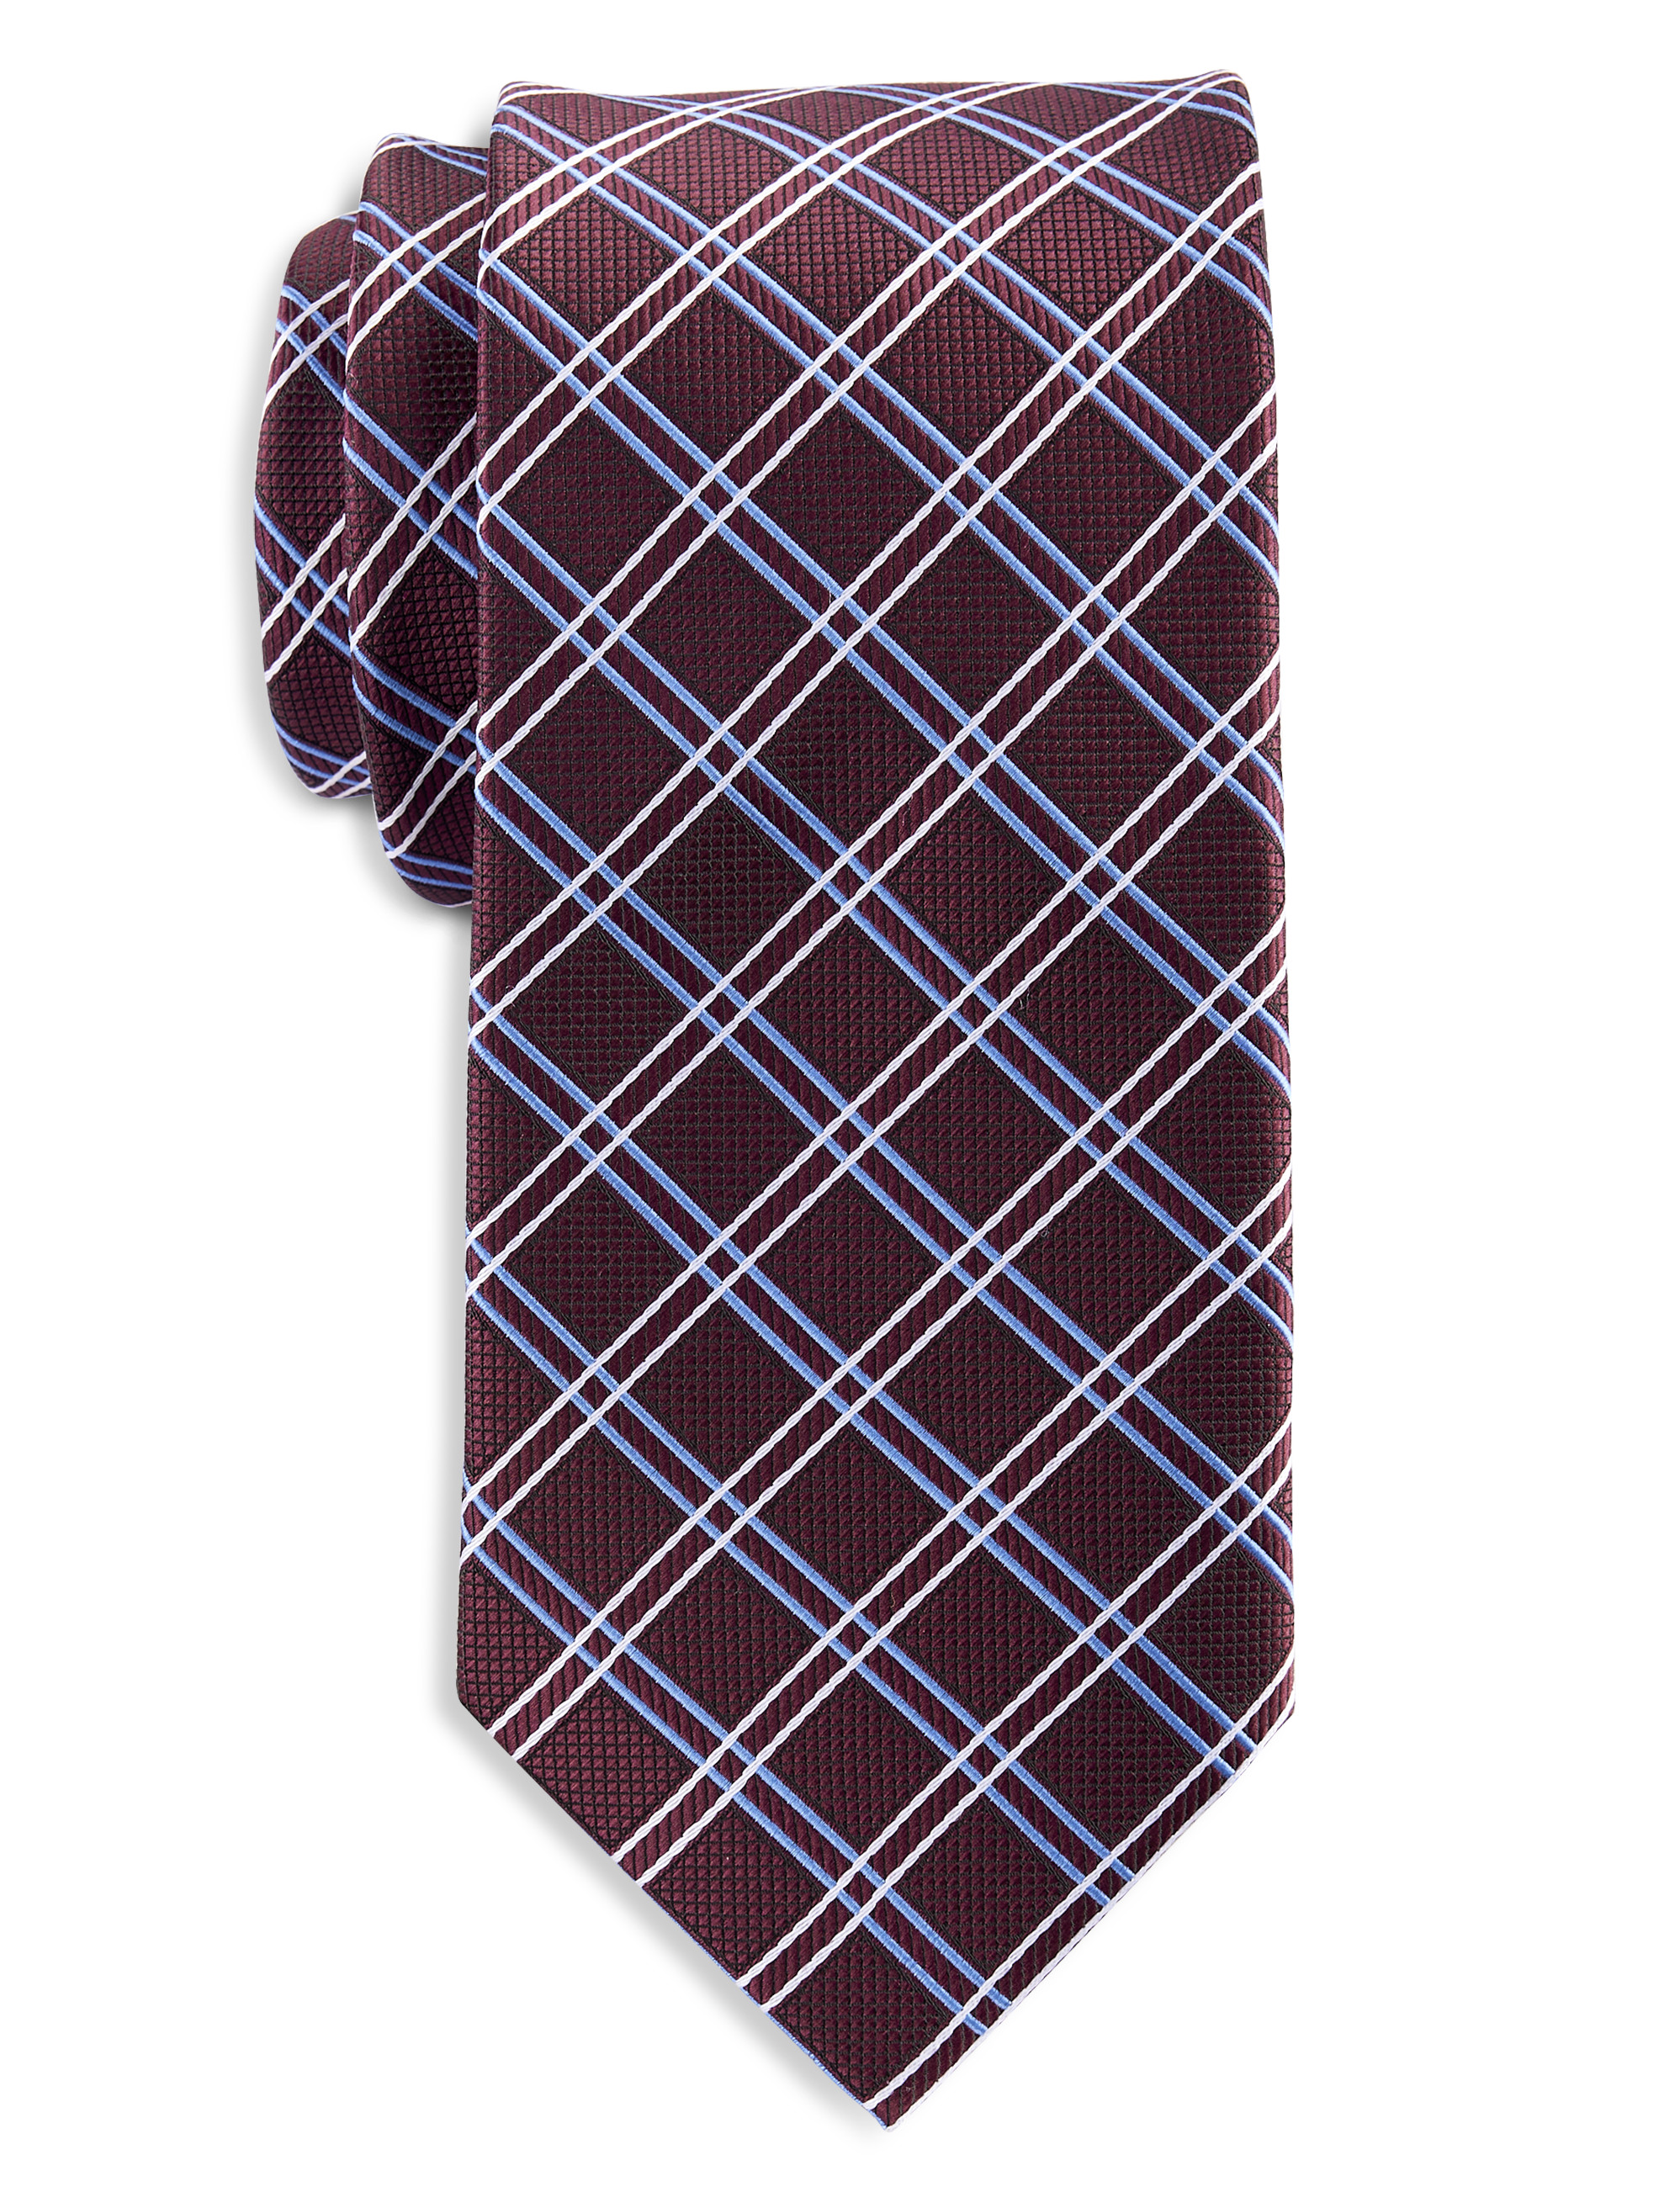 Double Grid Patterned Tie